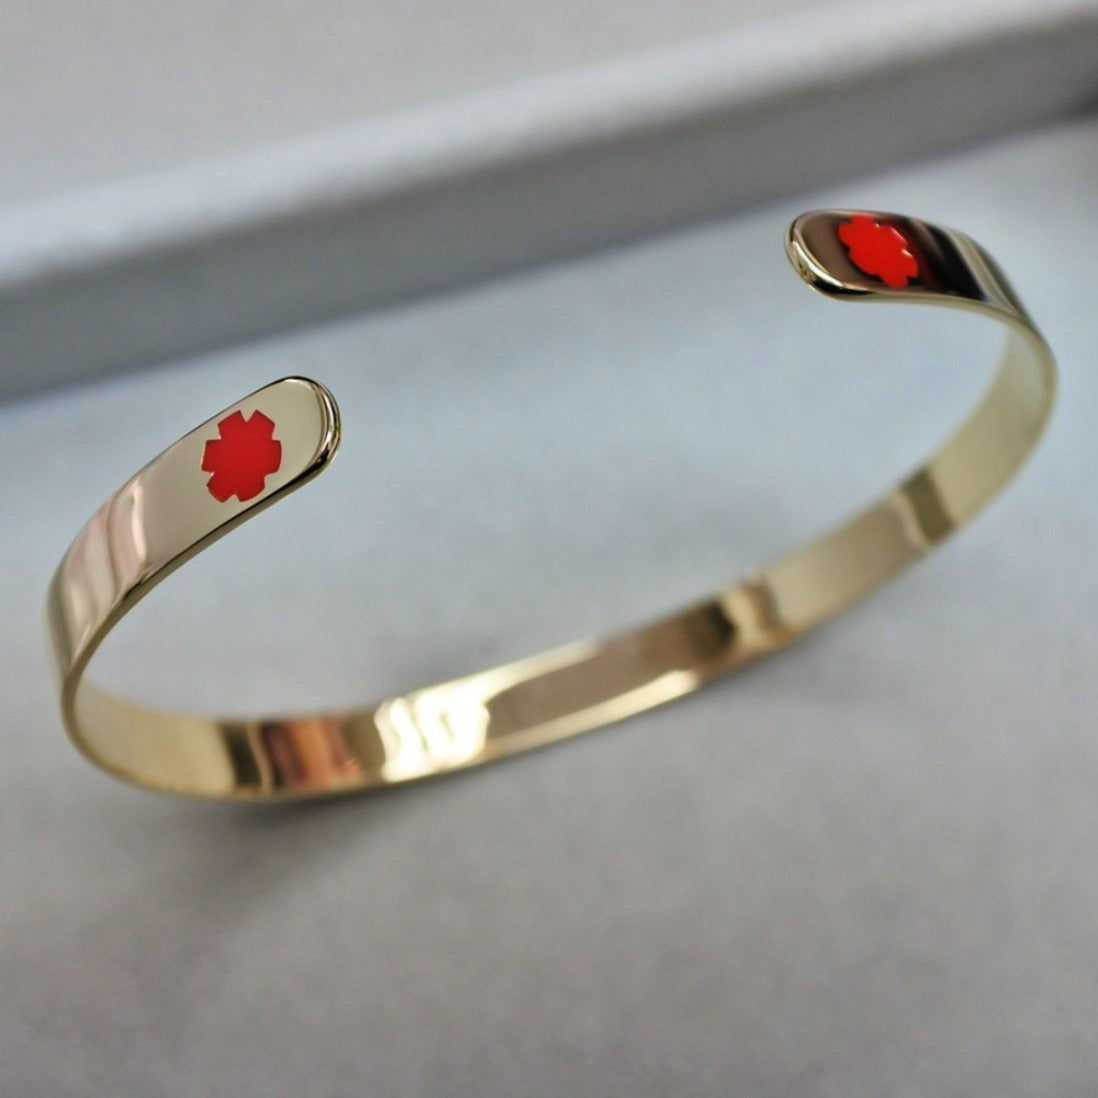 Medical ID Star of Life Cuff Bracelet from Charmed Medical Jewelry - 14K Gold Red Enamel